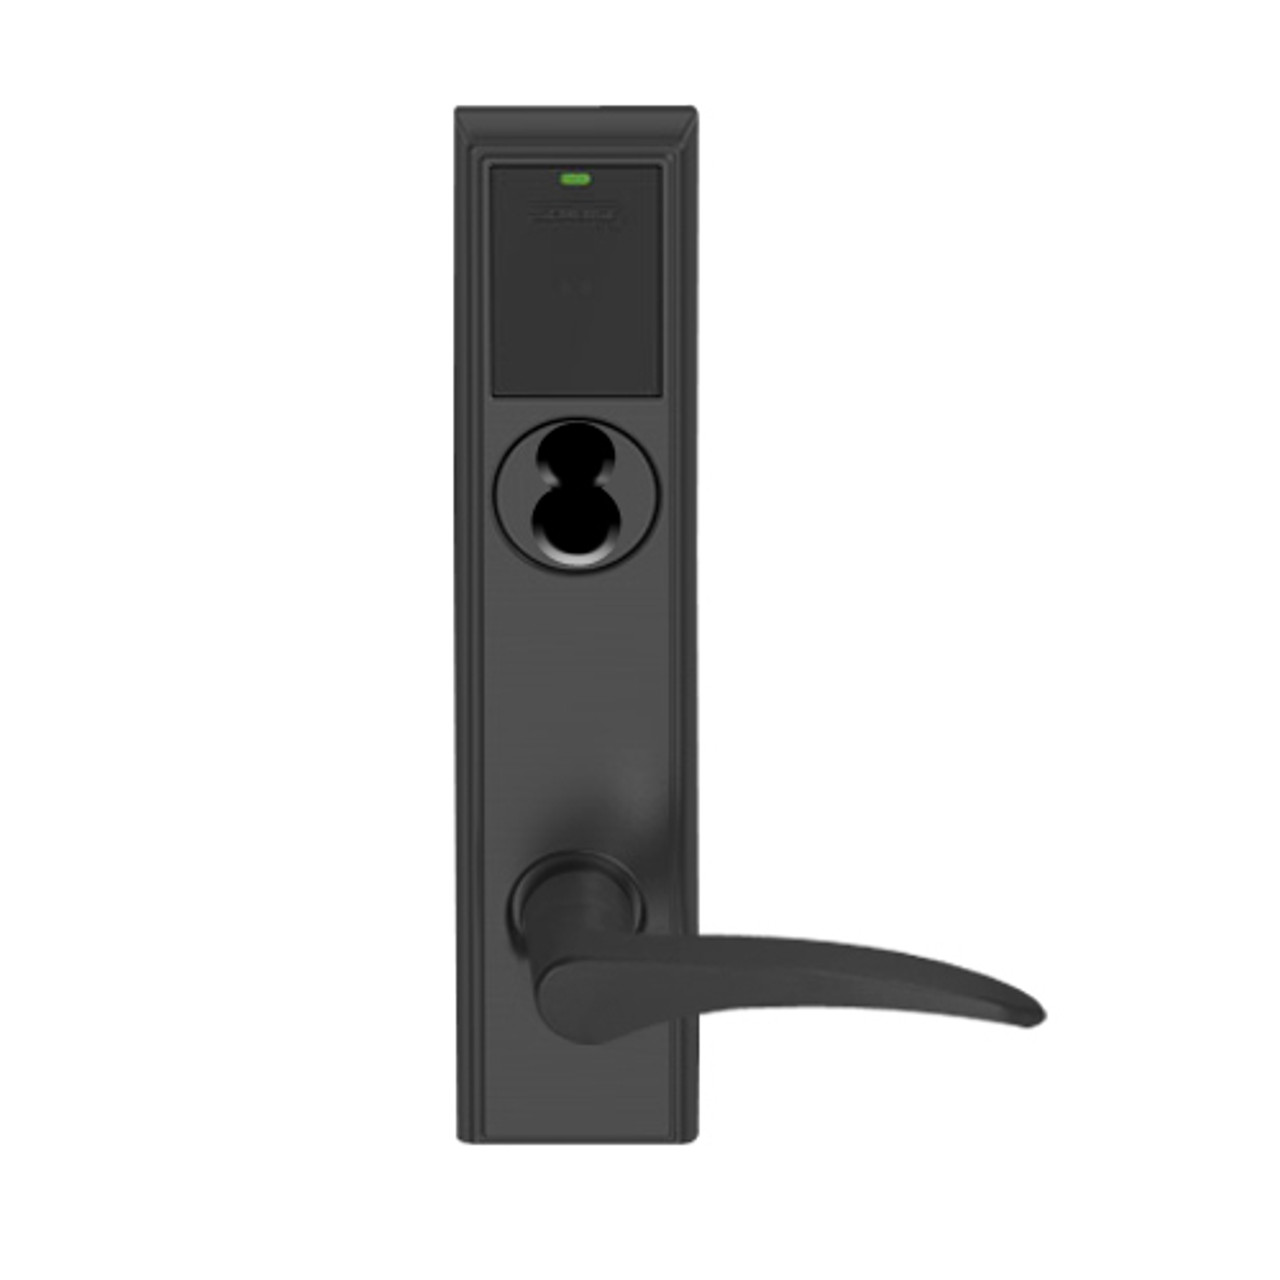 LEMD-ADD-BD-12-622-LH Schlage Privacy/Apartment Wireless Addison Mortise Deadbolt Lock with LED and 12 Lever Prepped for SFIC in Matte Black